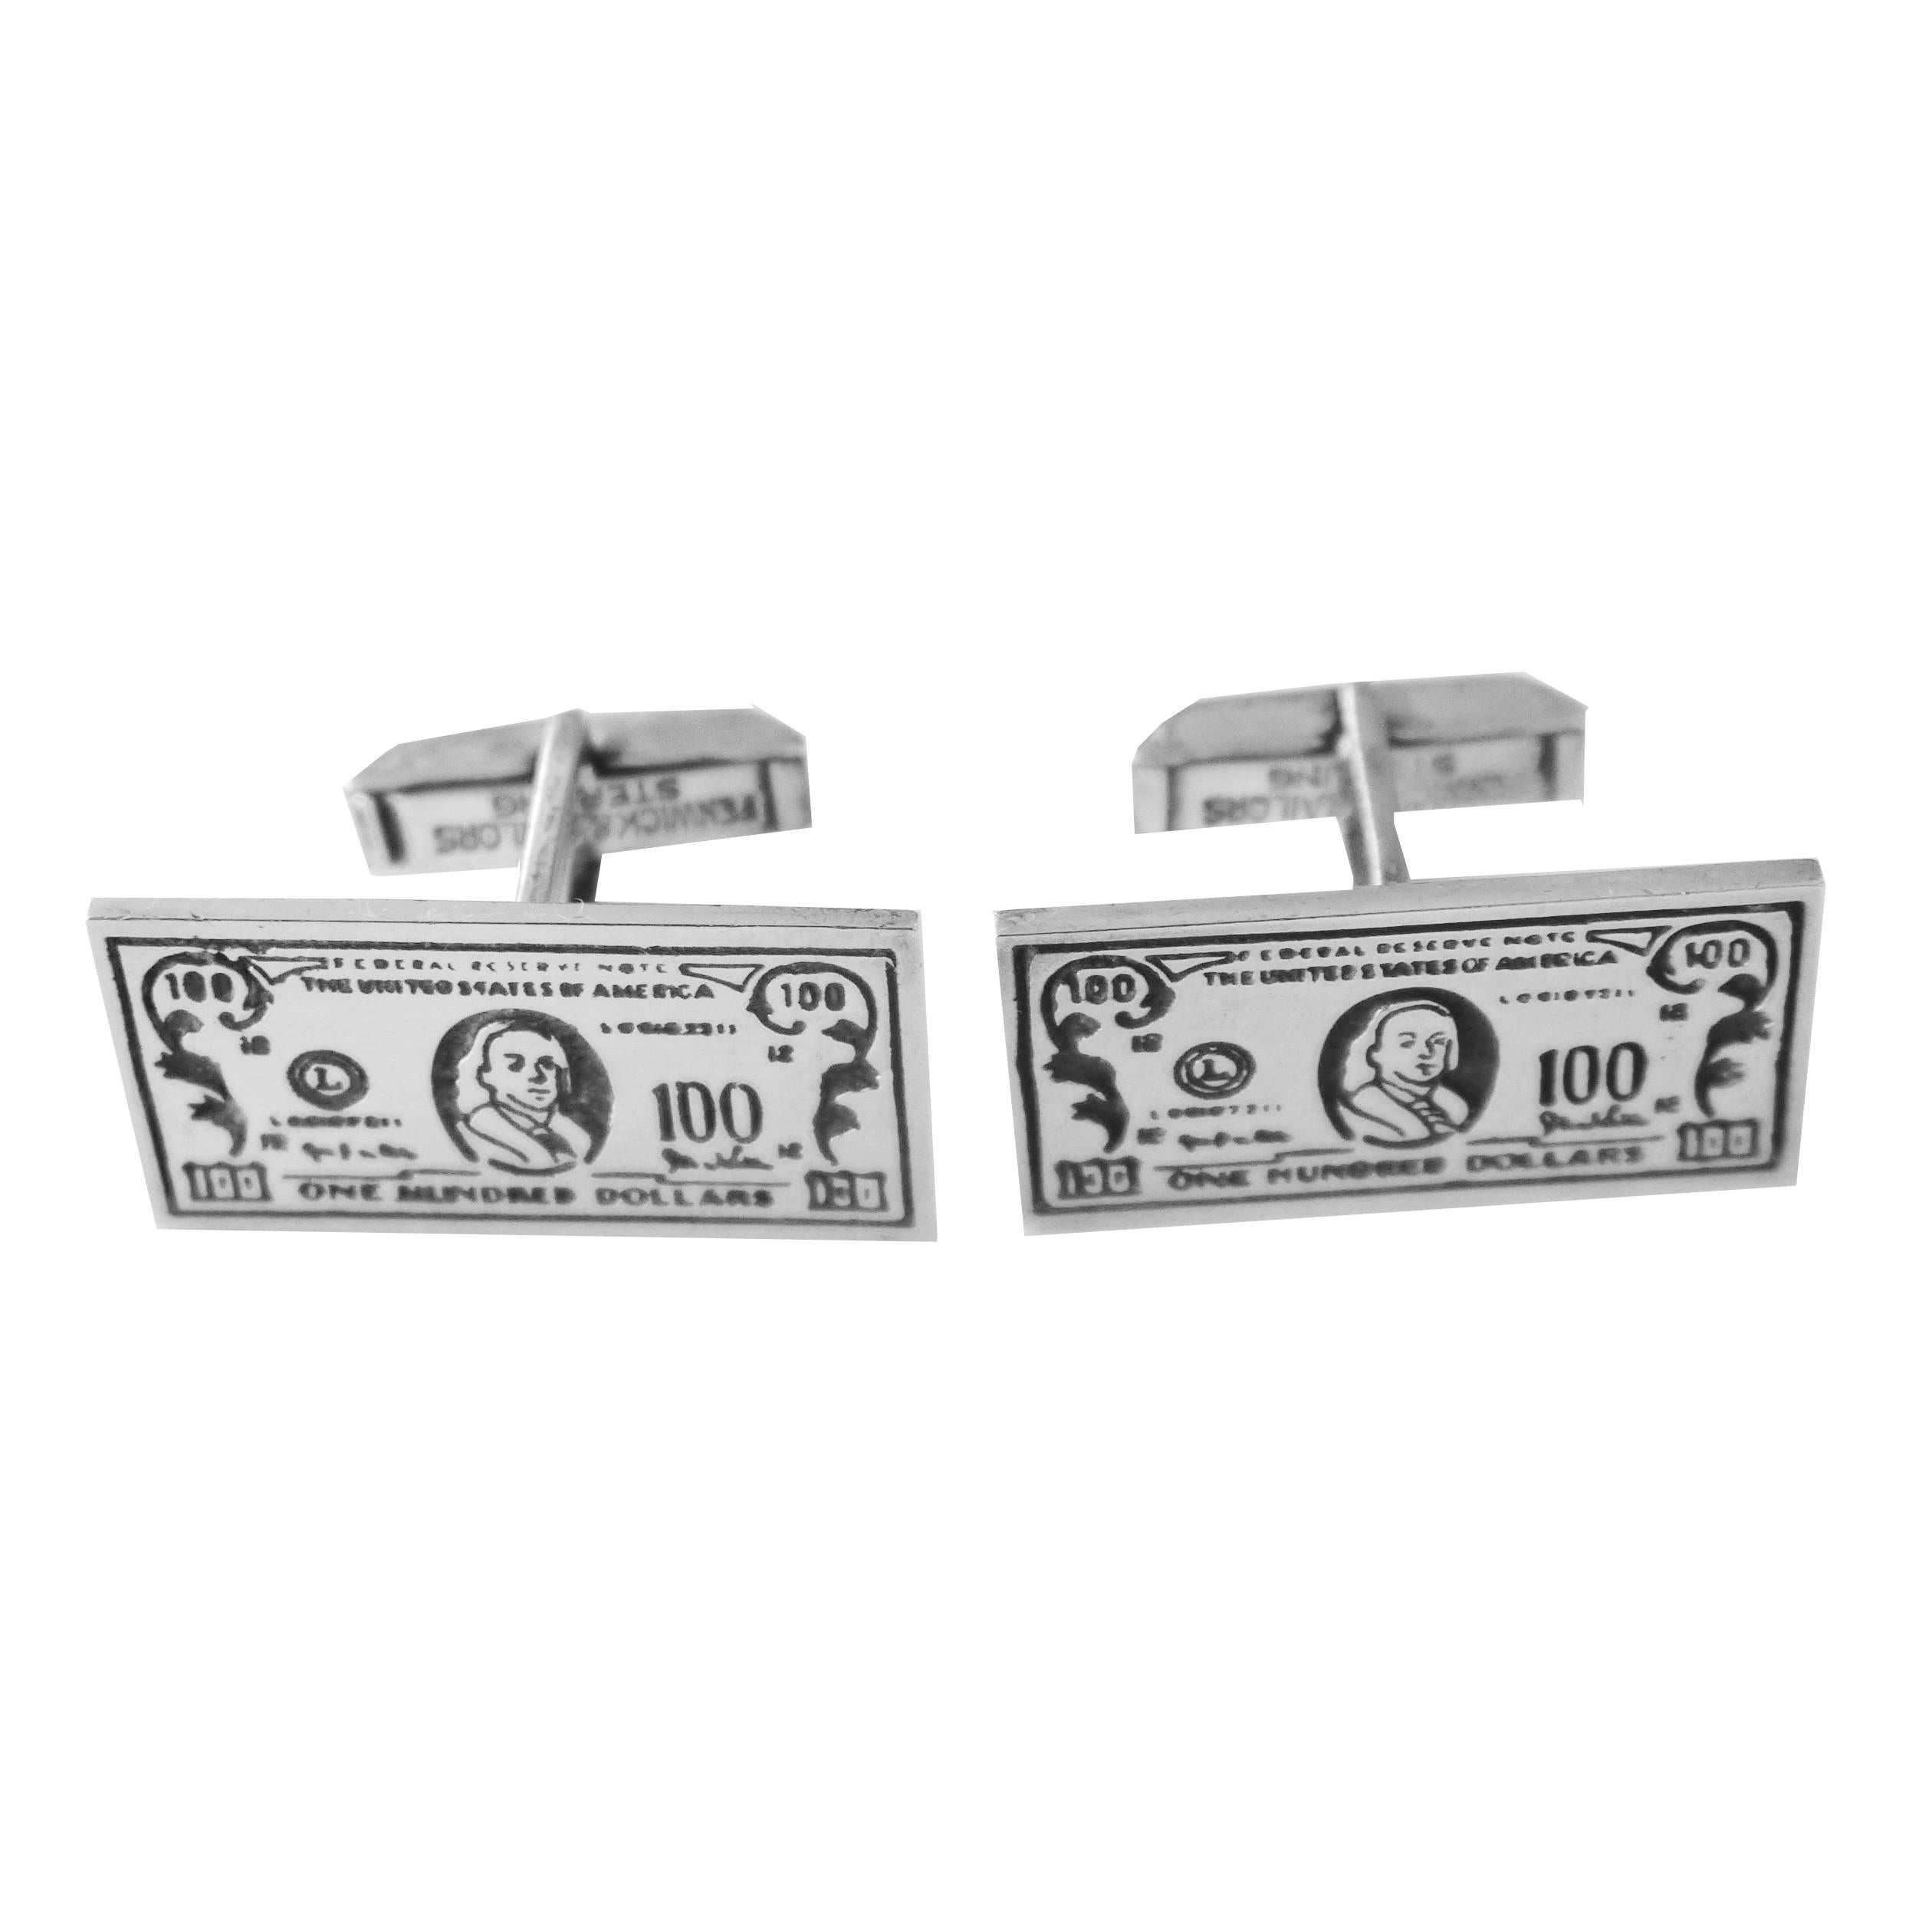 Great pair of 1950s cuff links in the form of 100 dollar bills signed sterling.
Signed Fenwick and Sailors.